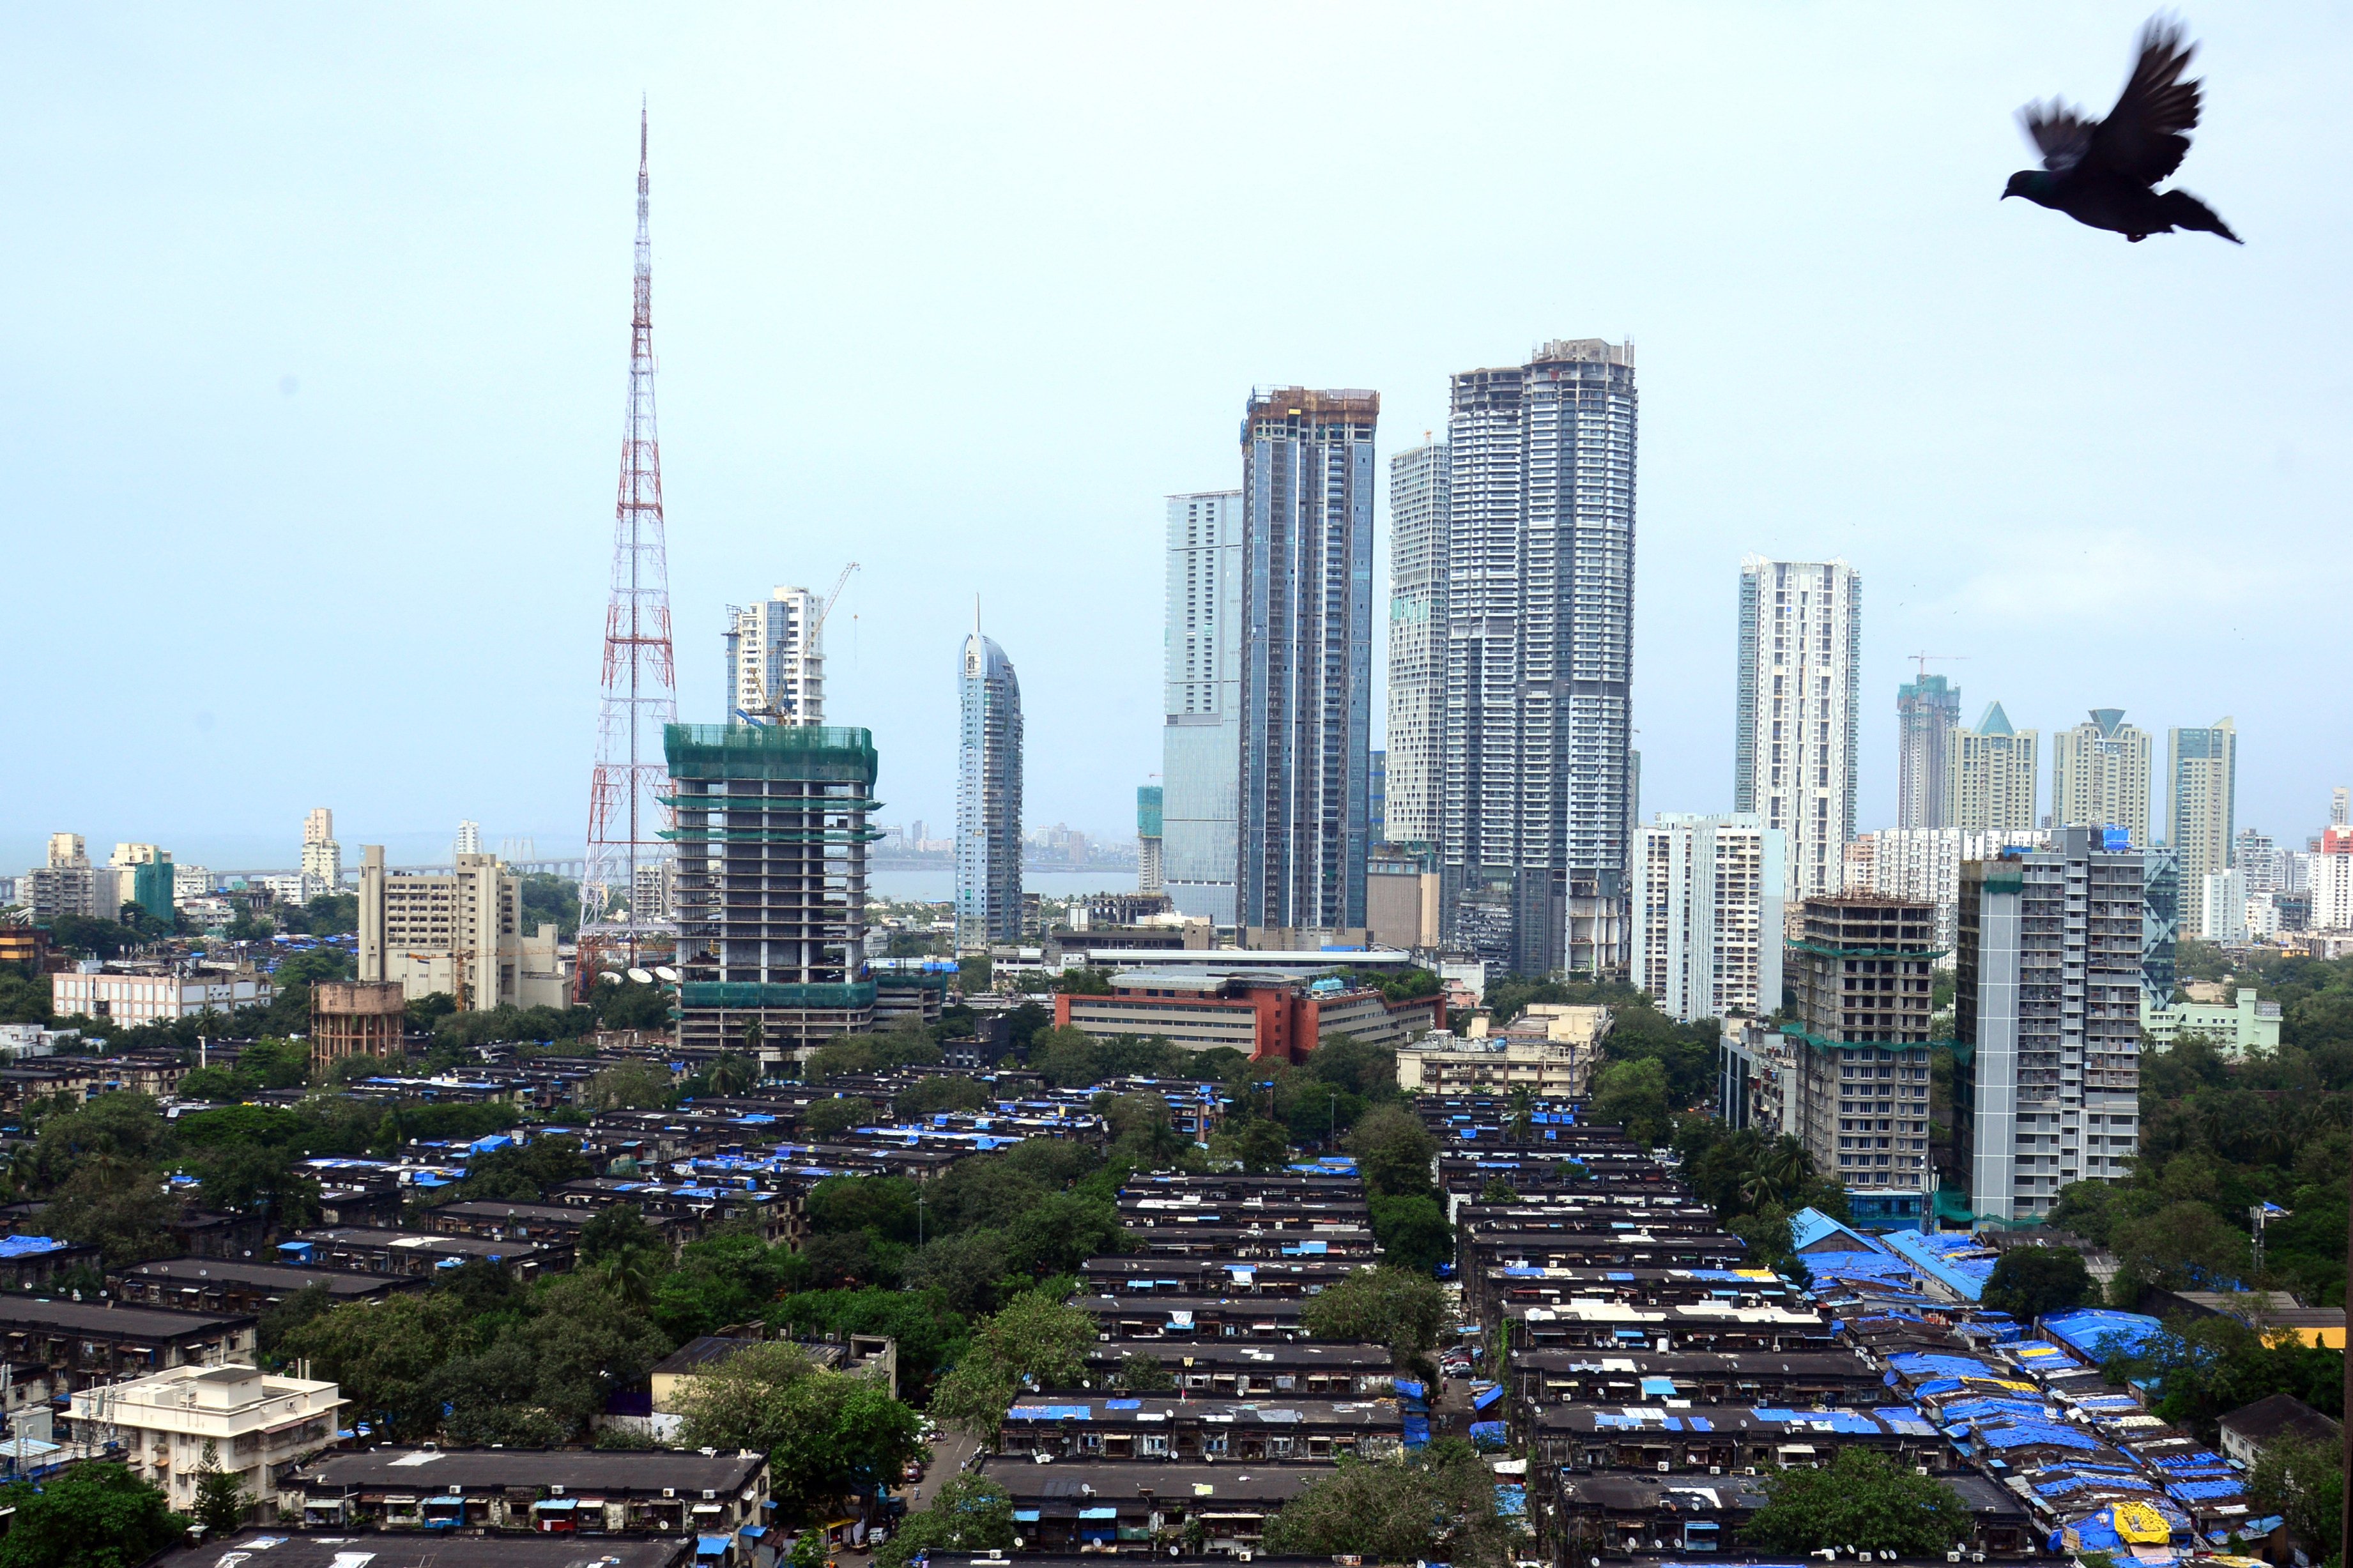 A bird’s eye view of Mumbai shows affordable workers’ accommodation in front of high-rise residential towers. Photo: AFP